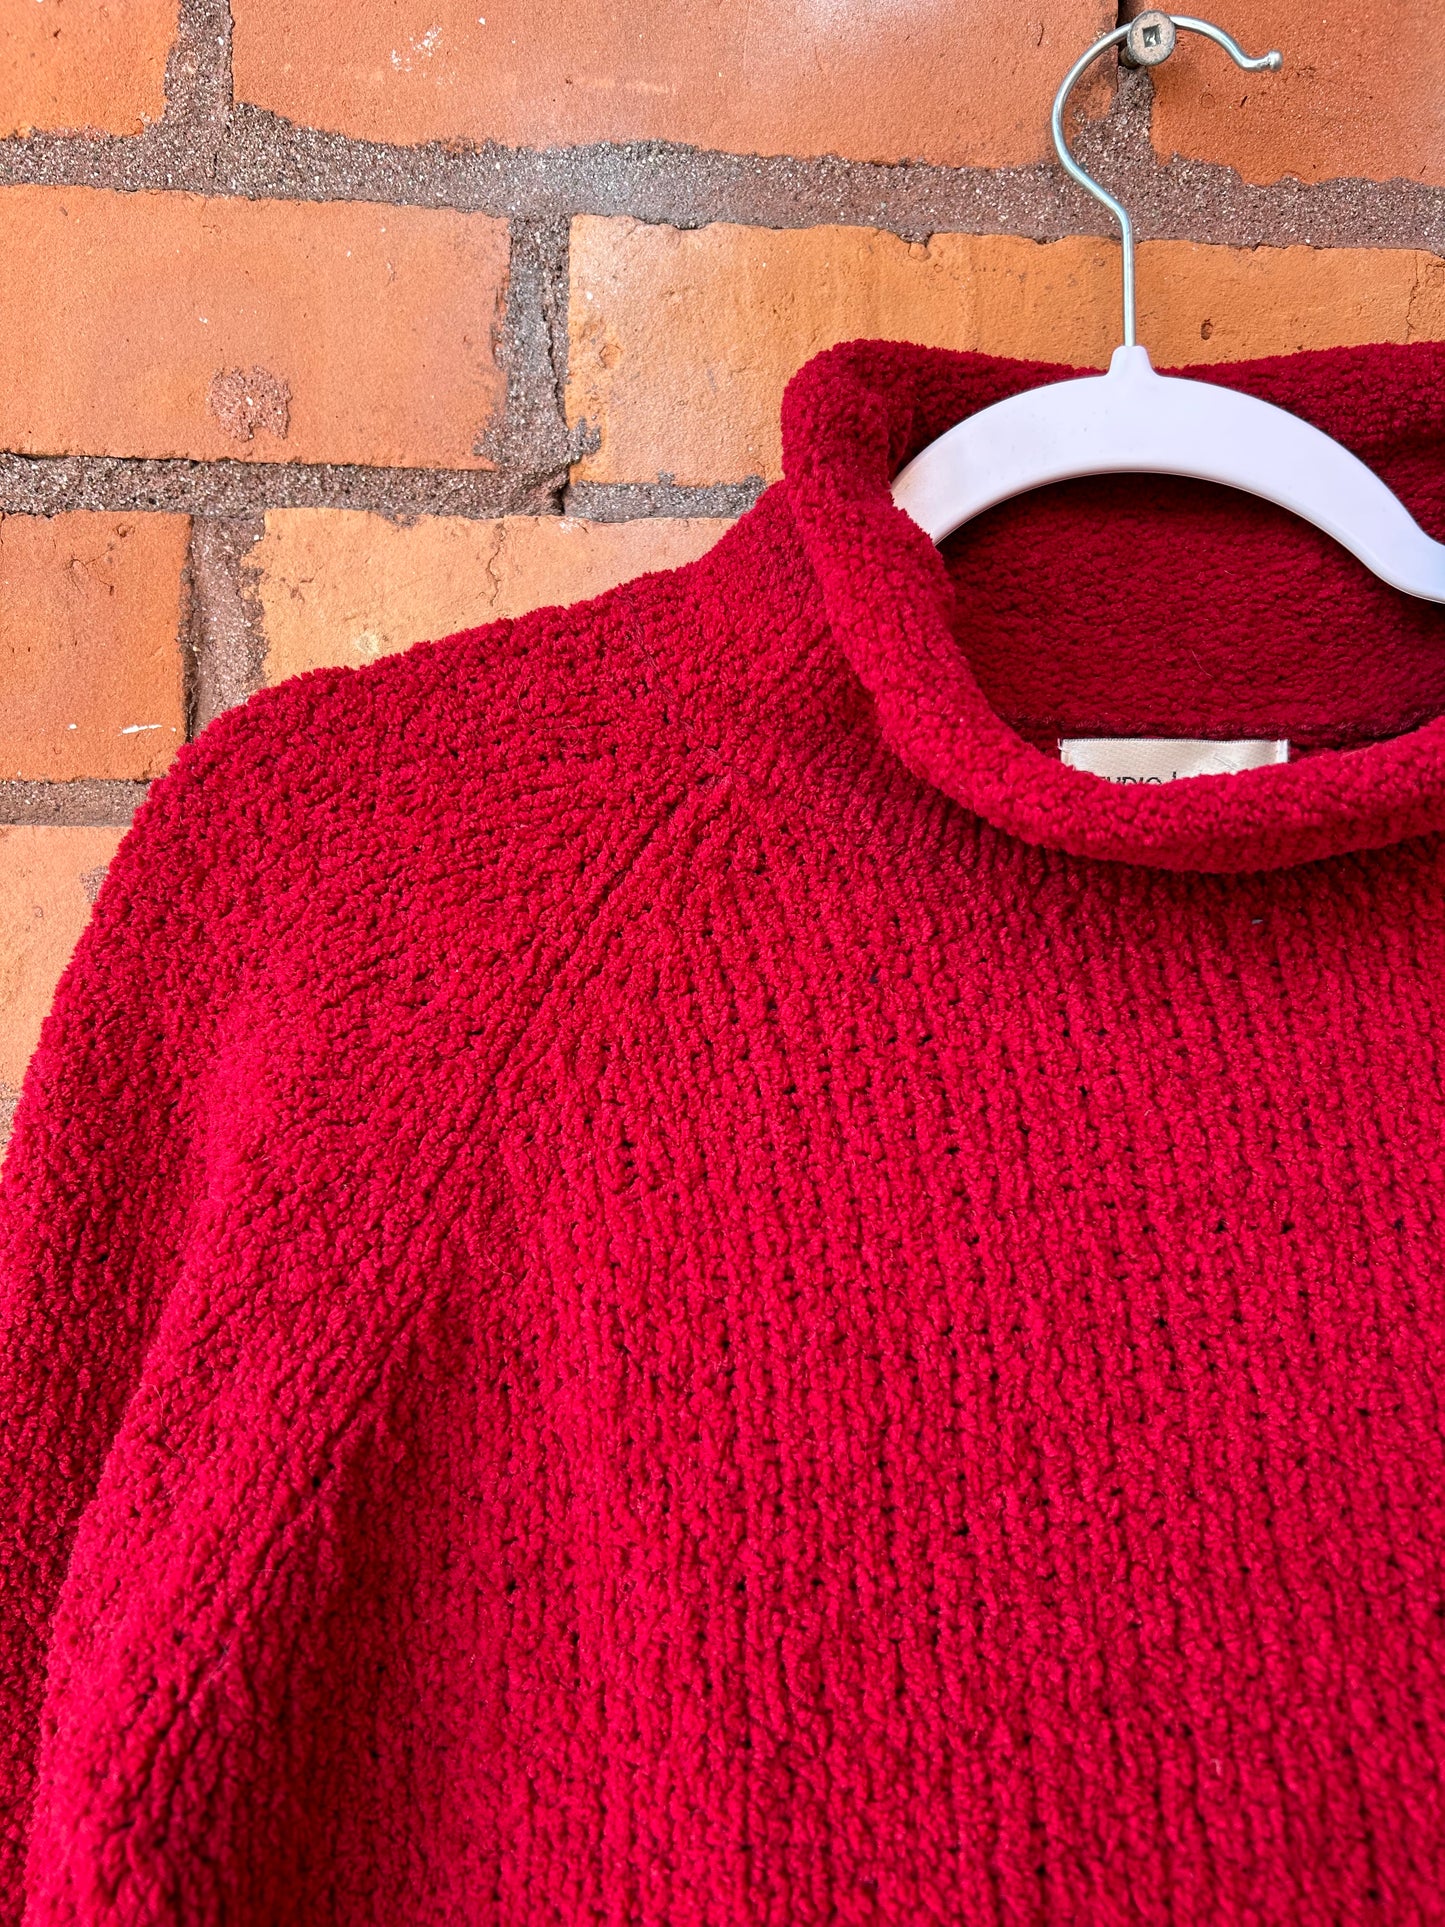 90’s Vintage Red Chenille Roll Neck Sweater / Size M